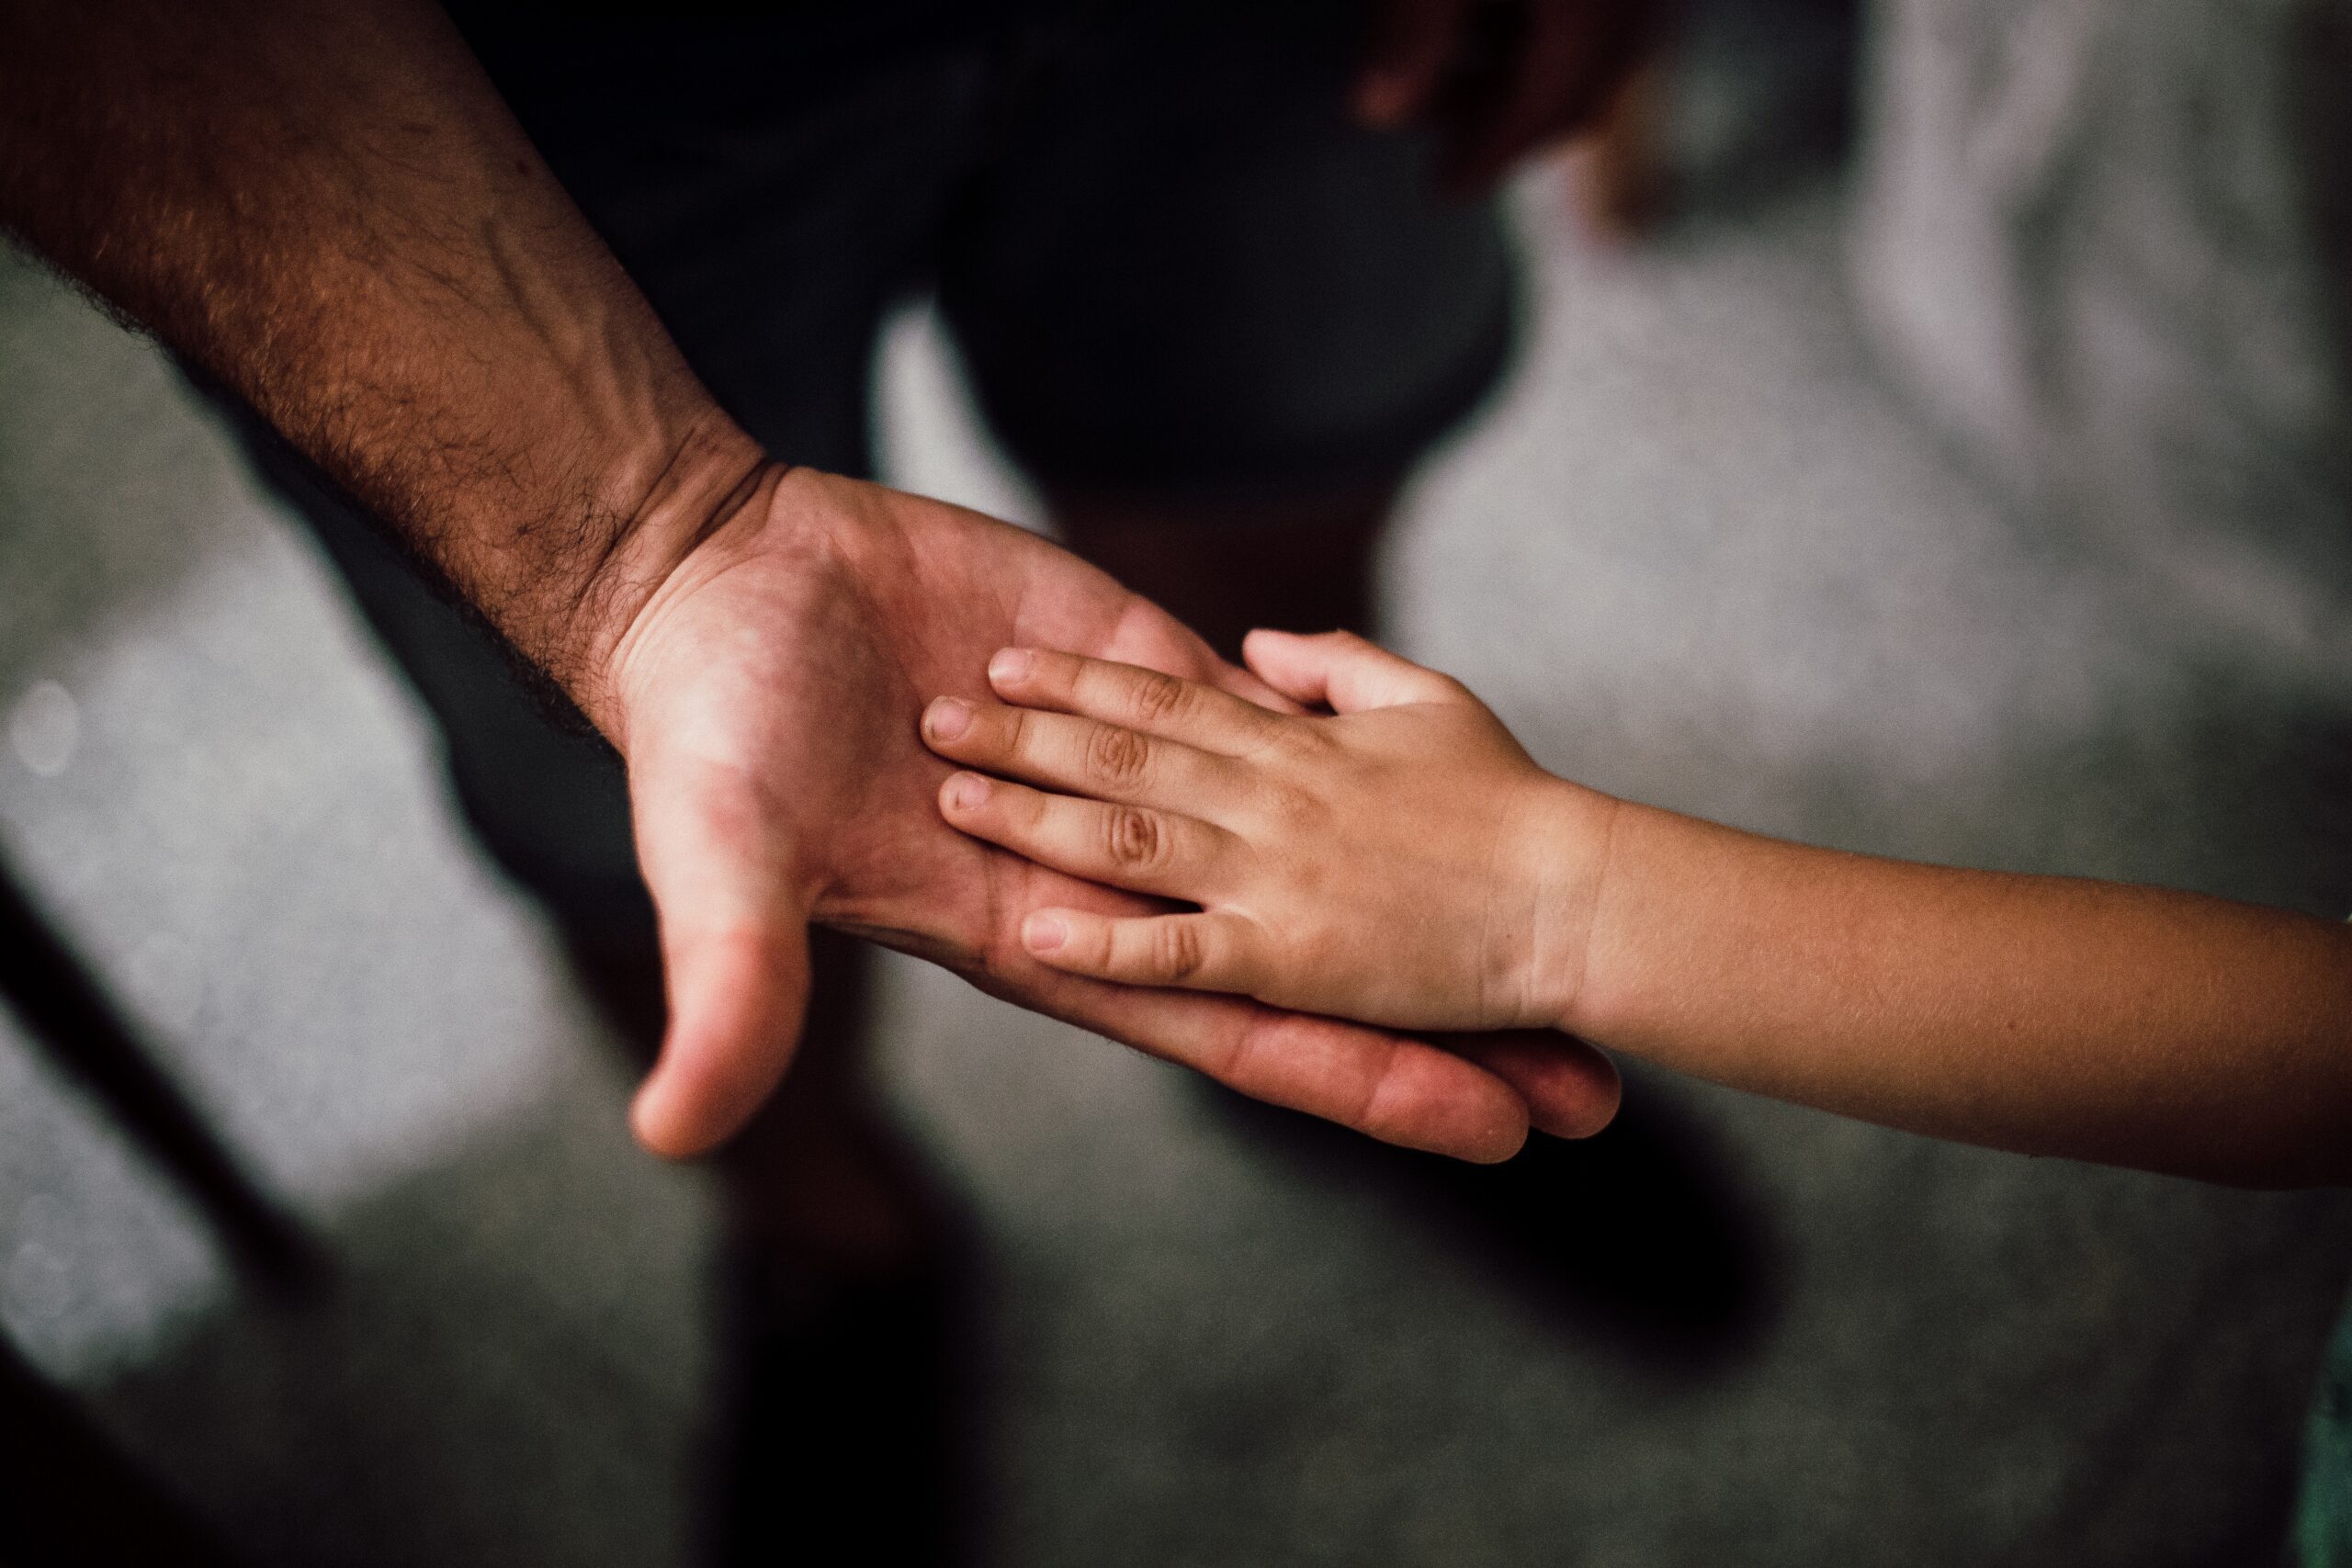 Child putting hand in father's palm